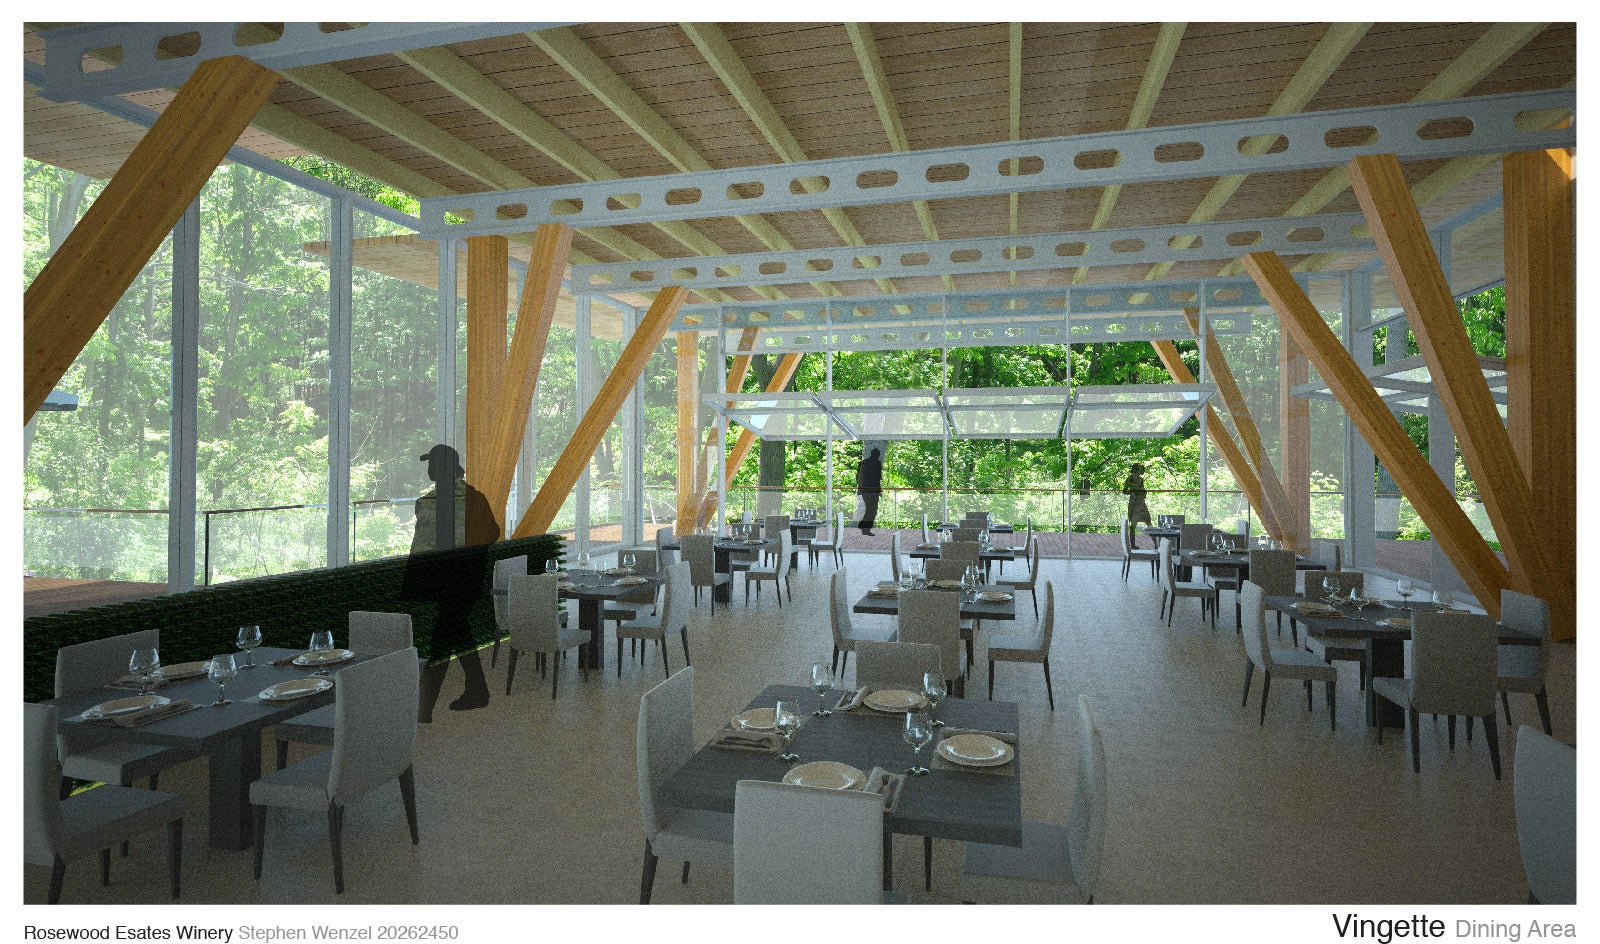 An interior render of a restaurant with floor to celling glazing on each wall. The view is of a forest outside.